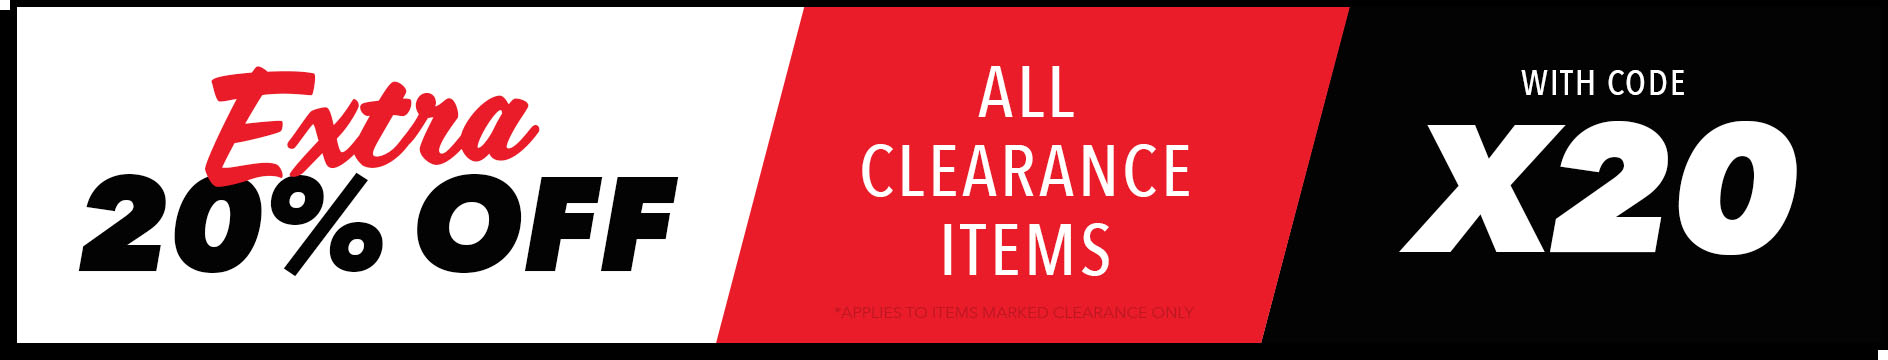 Extra 20% OFF on all clearance items with promo code at Golfbox. Save on clothing, footwear & more